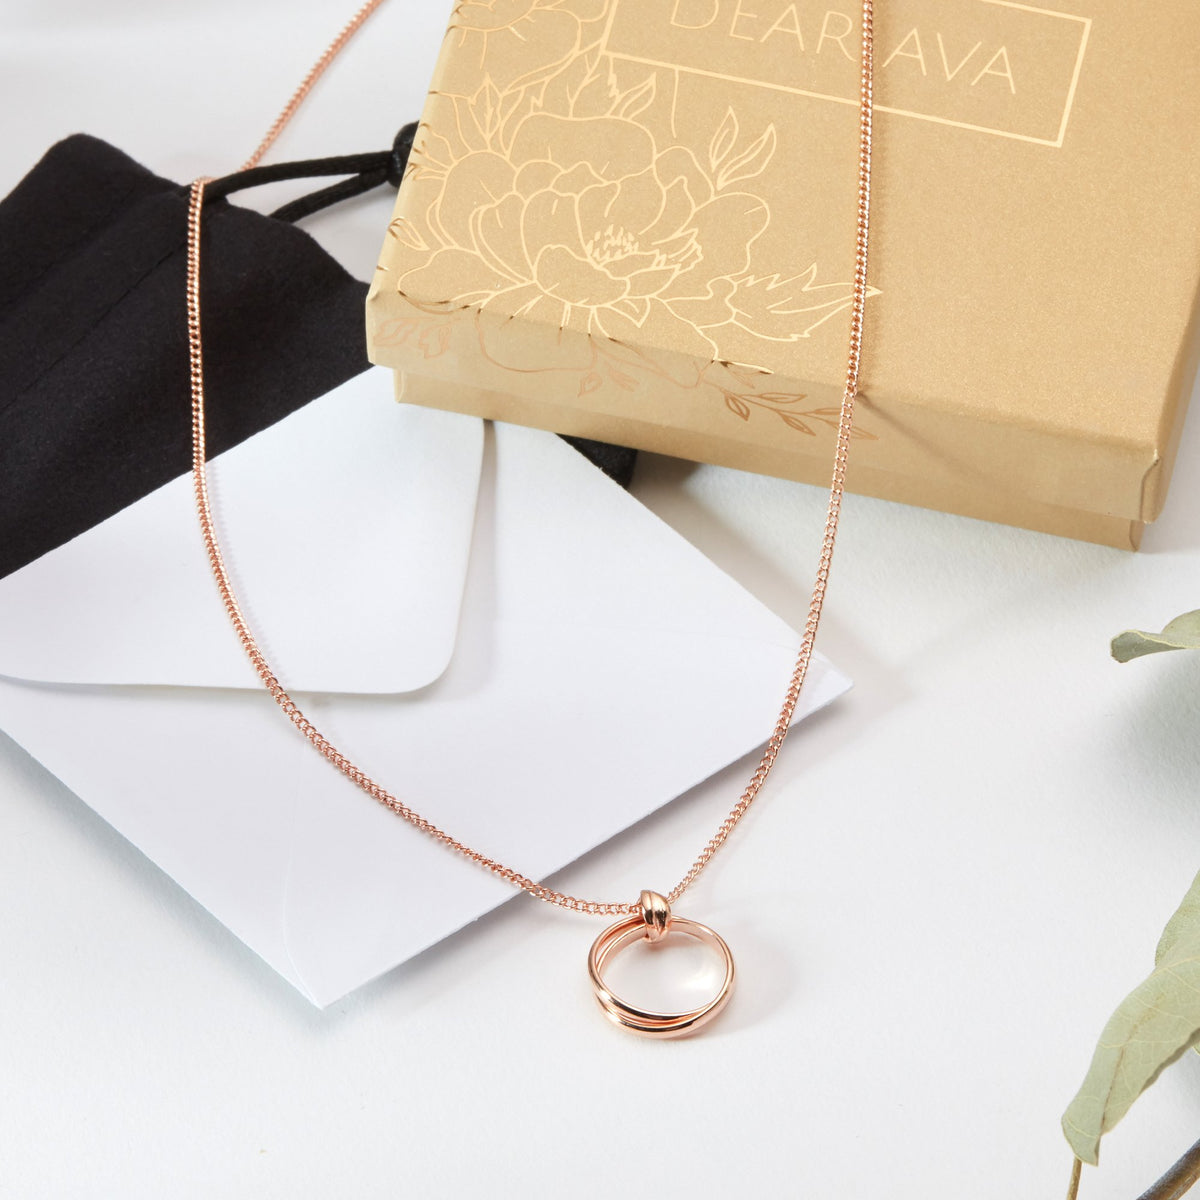 Gift for Yoga Teacher: Jewelry Present for Mindfulness Mentor, Health  Coach, and Your Favorite Personal Yoga Instructor, Multiple Necklace Styles  - Dear Ava